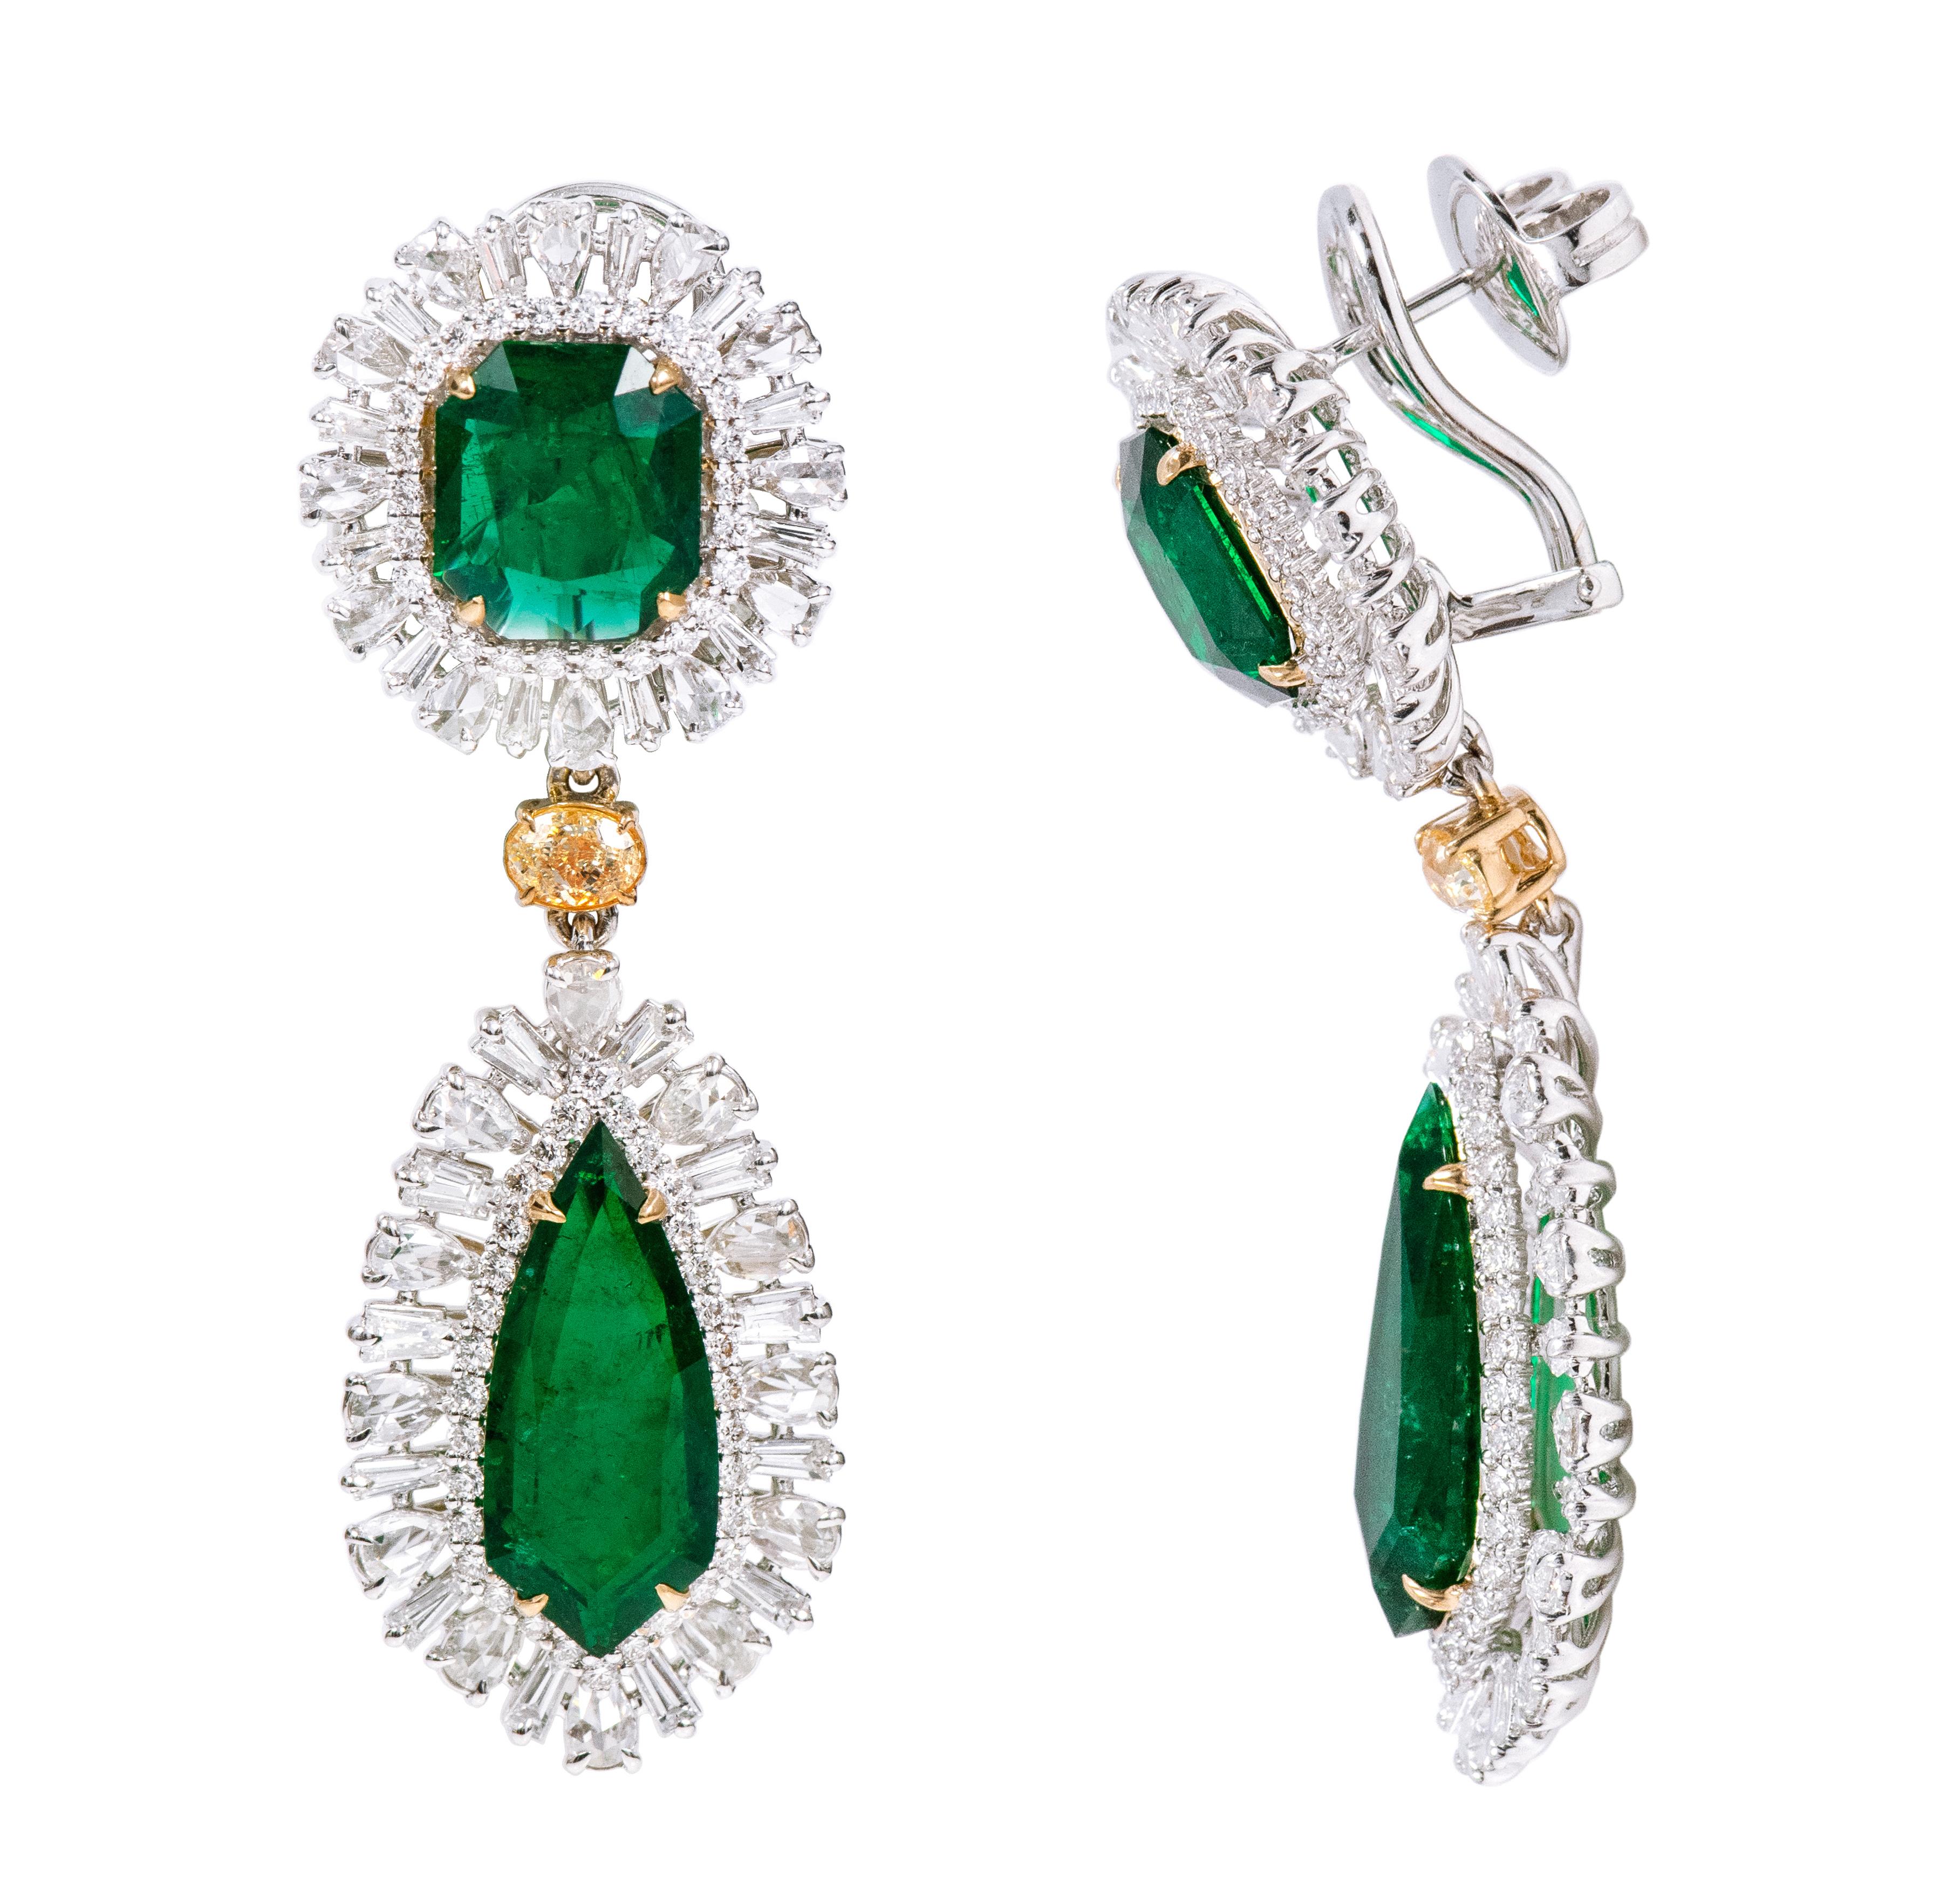 Contemporary 18 Karat Gold 22.25 Carat Emerald and Diamond Important Dangle Cocktail Earrings For Sale